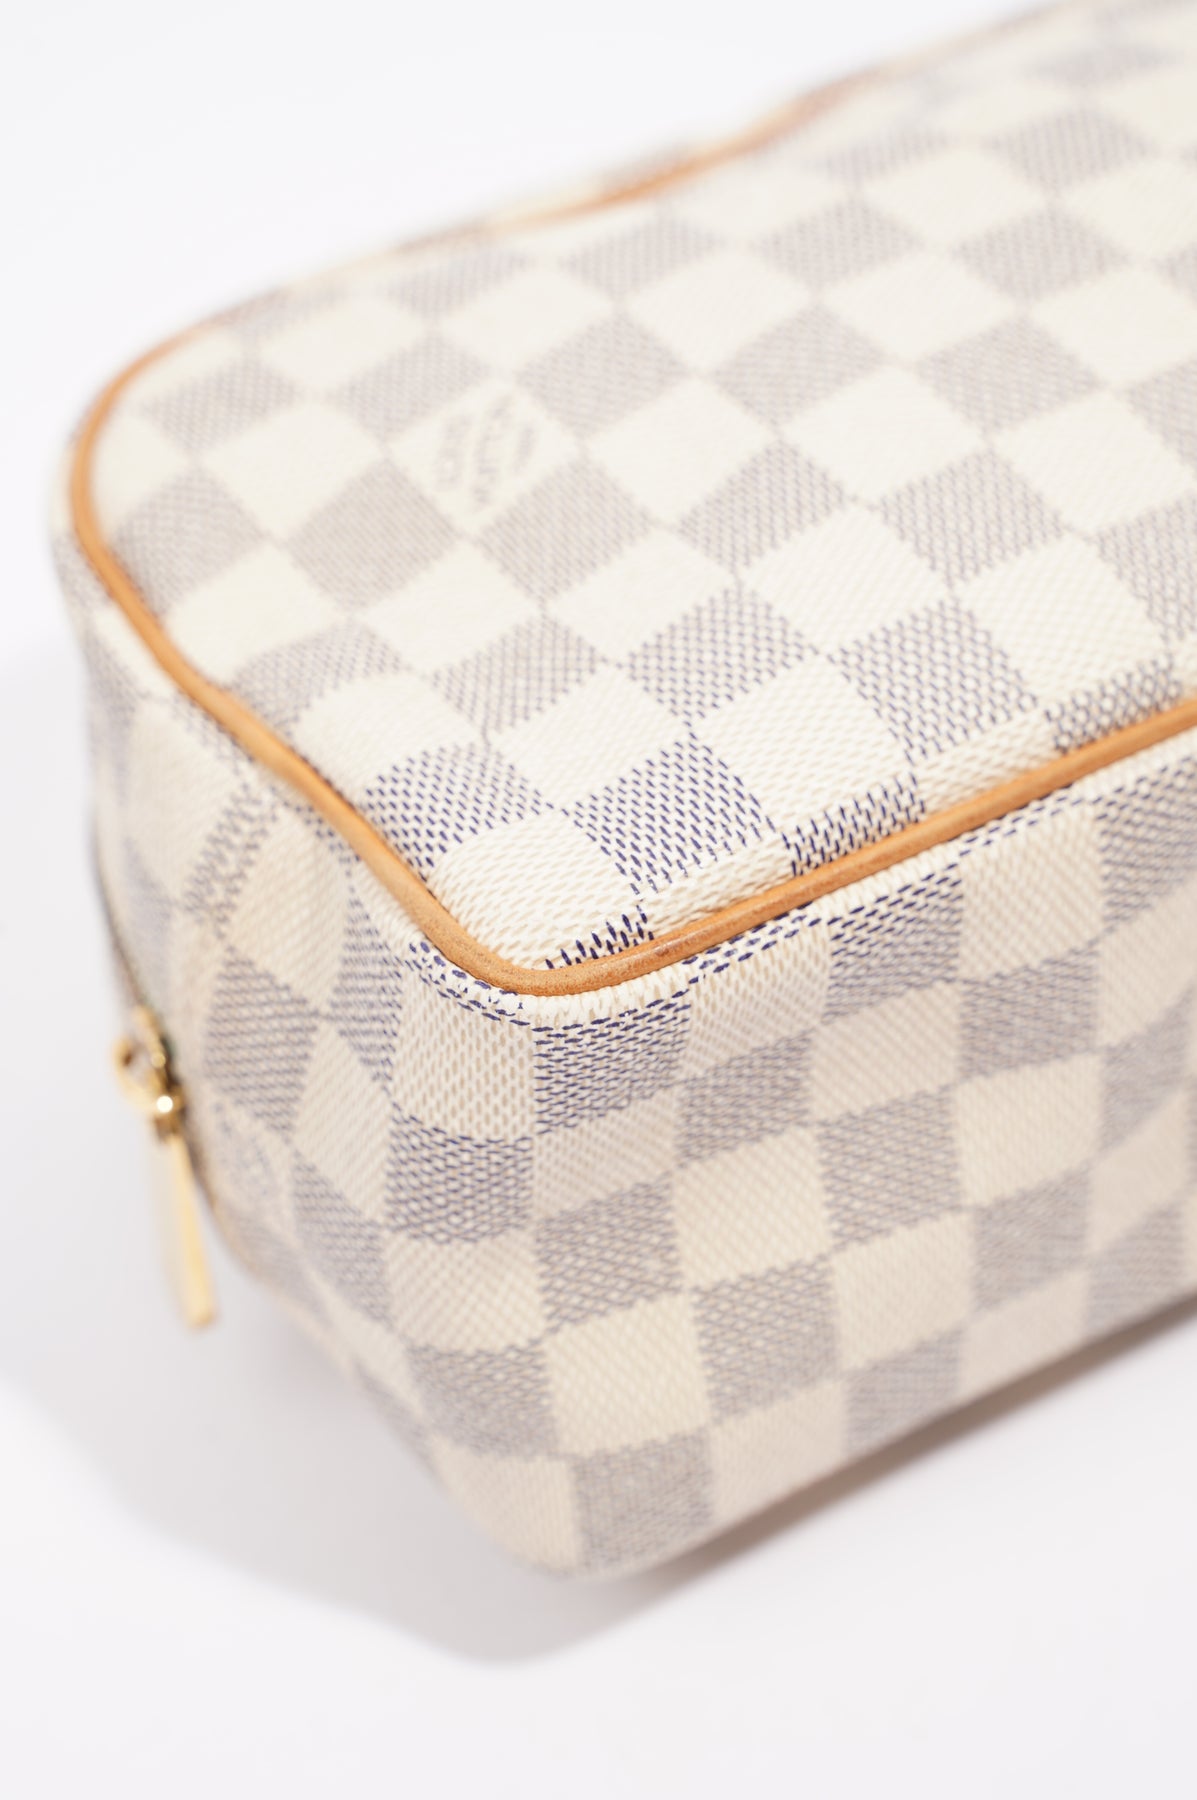 Toiletry Pouch On Chain Damier Azur - Women - Small Leather Goods